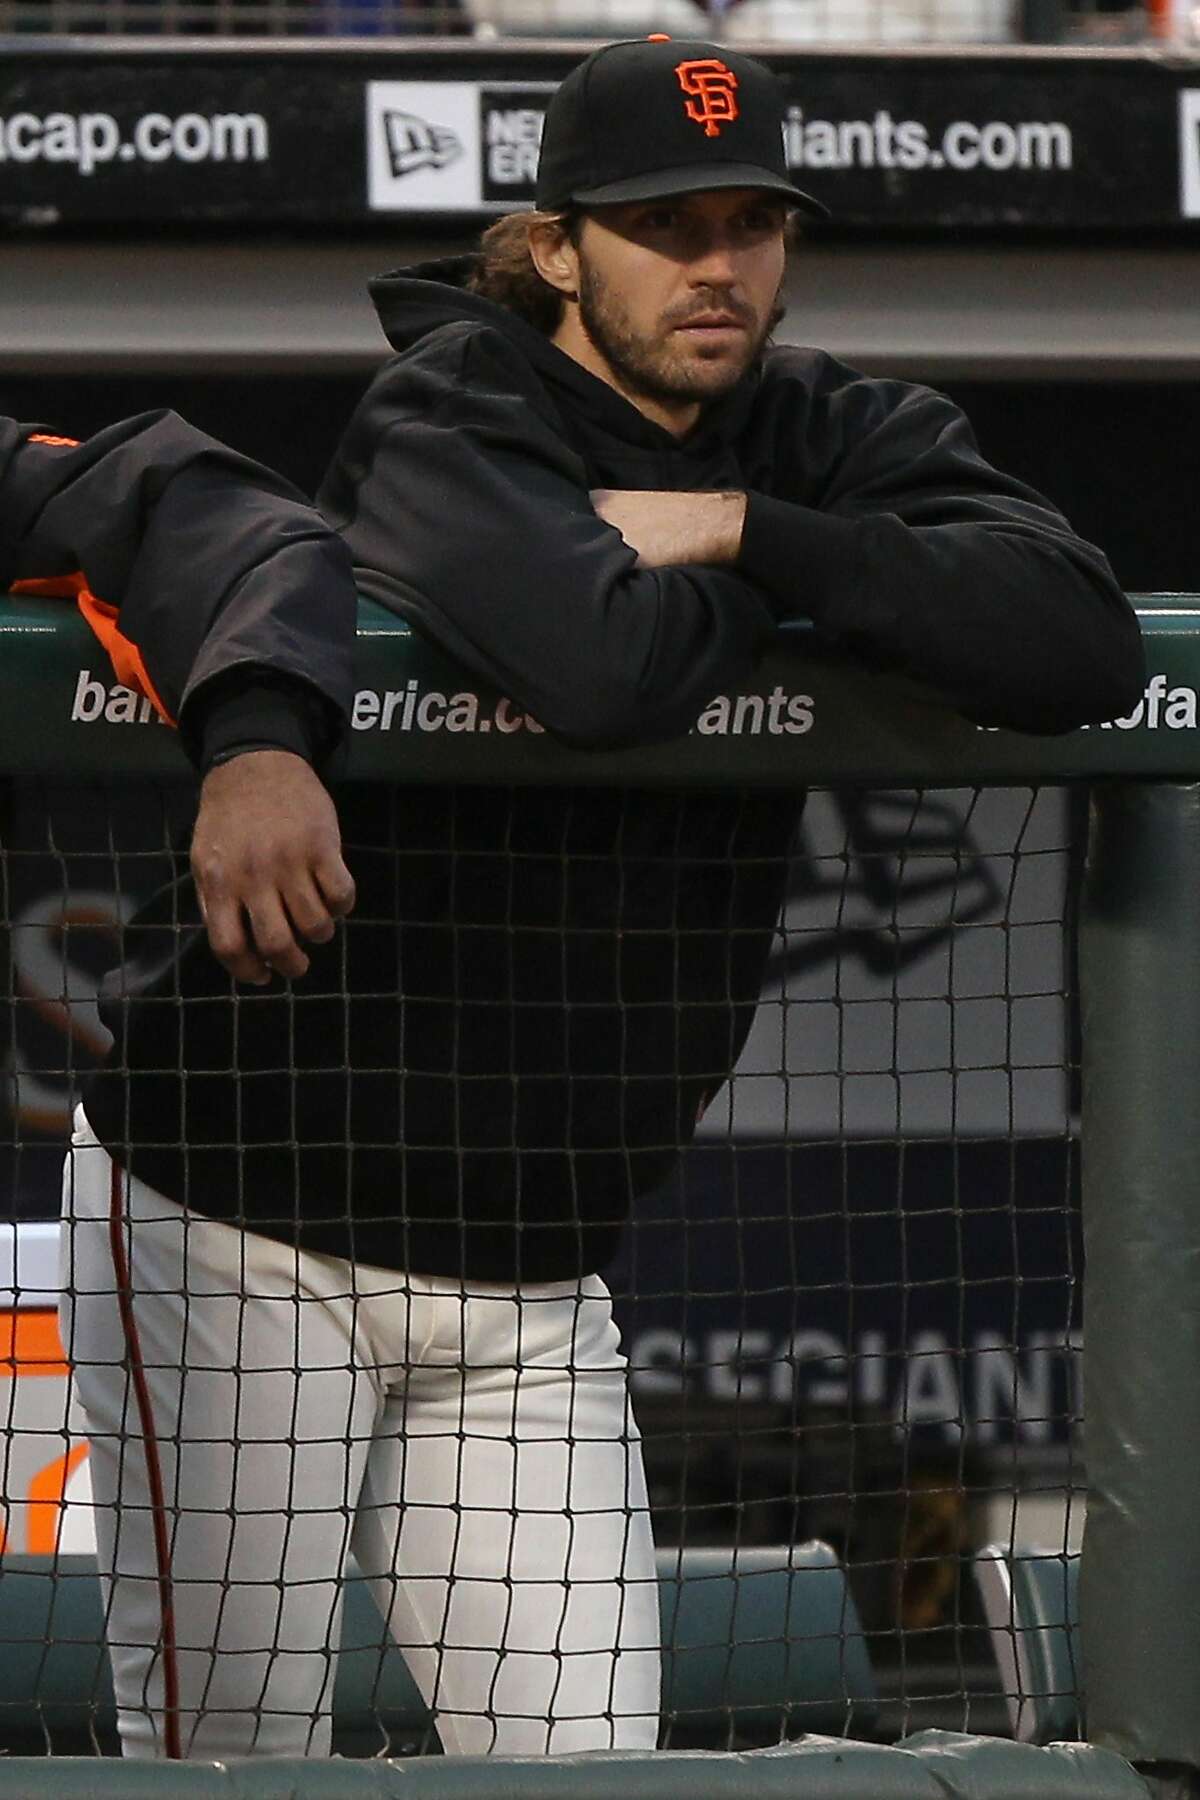 SAN FRANCISCO - OCTOBER 27: Barry Zito of the San Francisco Giants looks on against the Texas Rangers in Game One of the 2010 MLB World Series at AT&T Park on October 27, 2010 in San Francisco, California. ~~